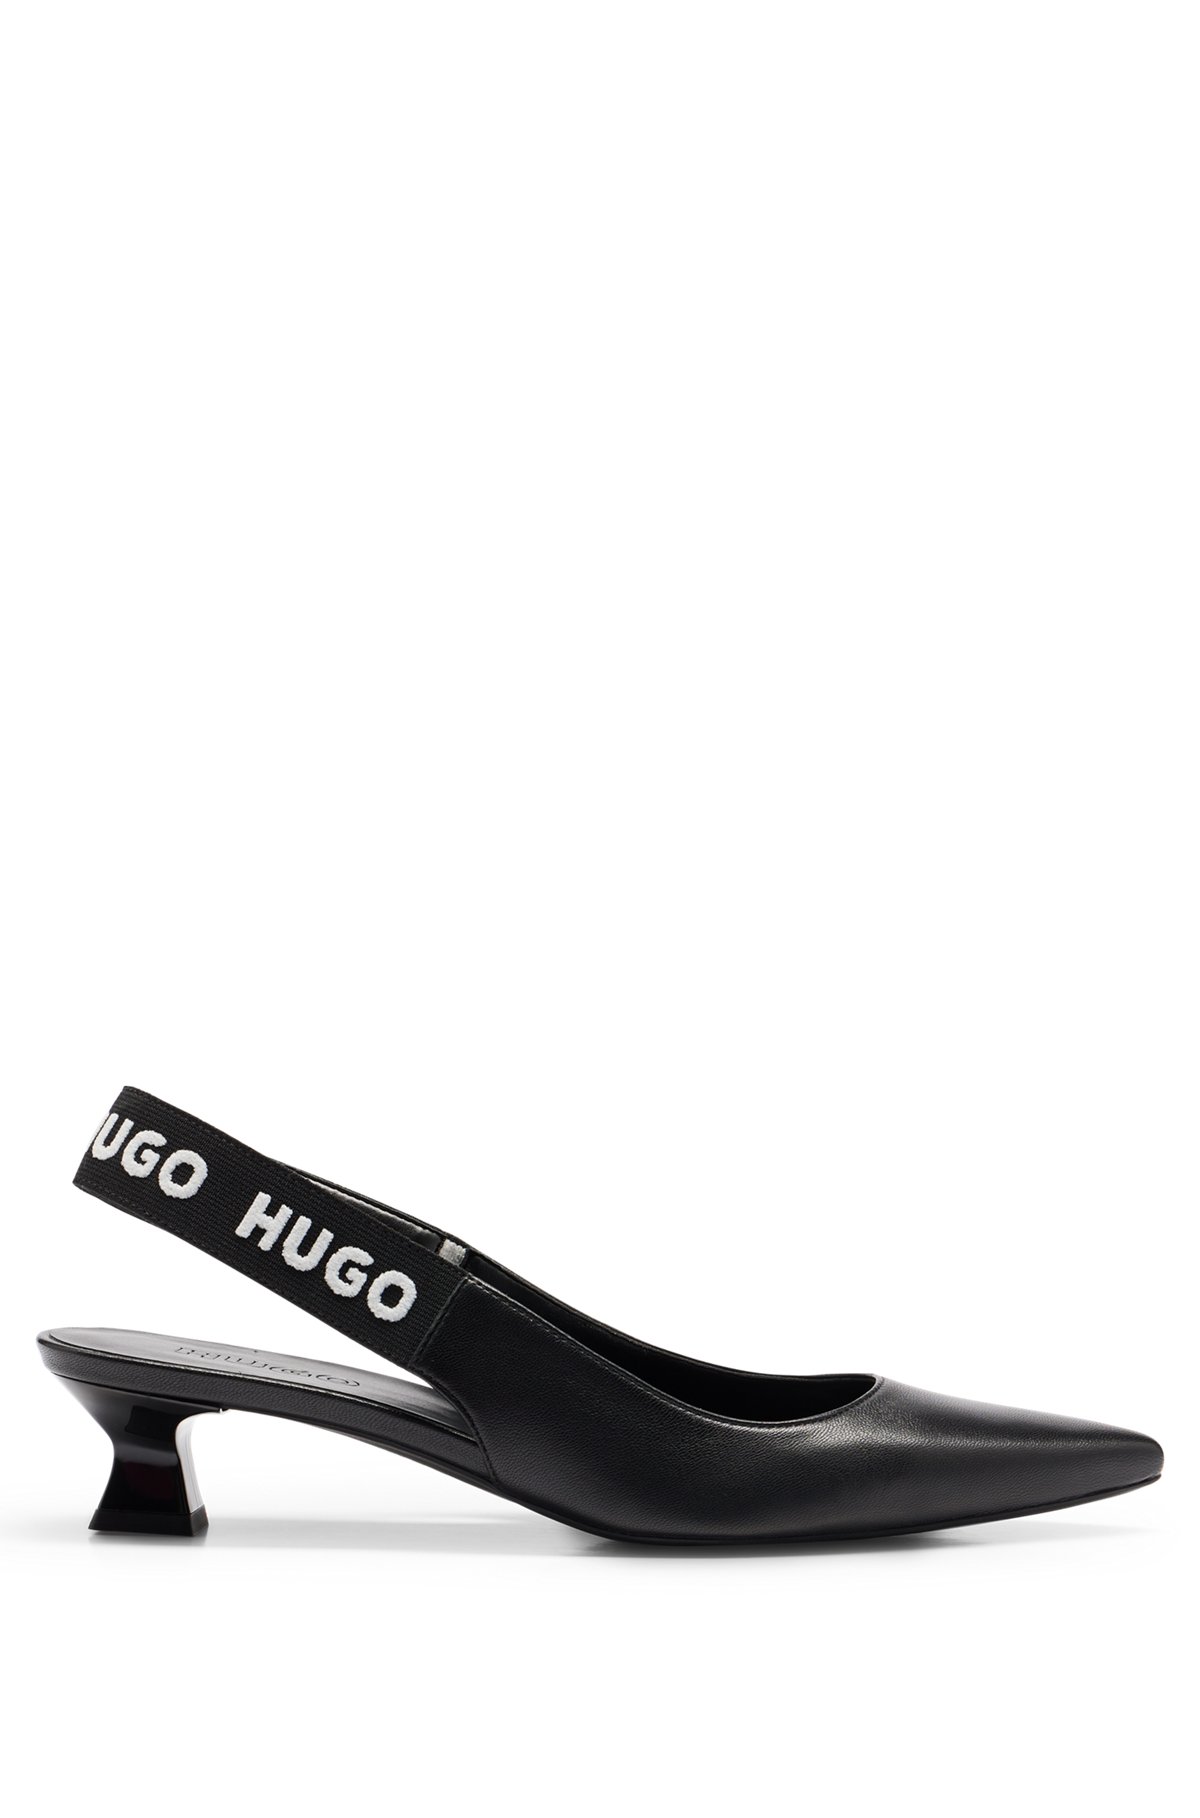 Heeled pumps in nappa leather with branded slingback strap, Black